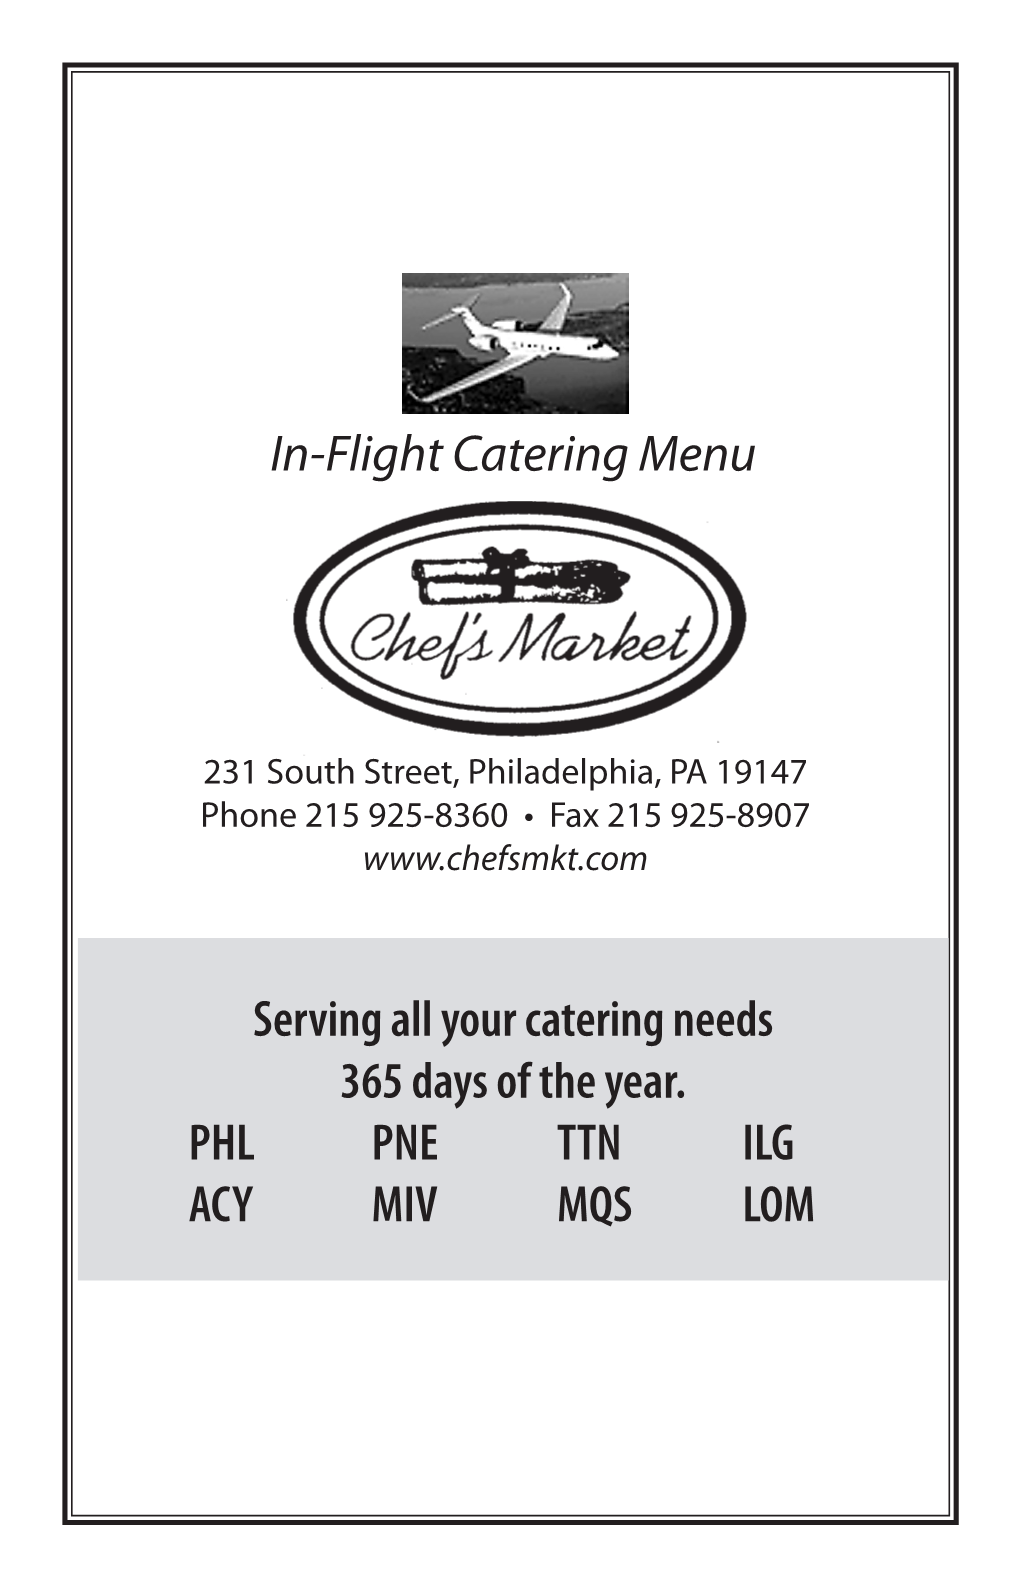 In-Flight Catering Menu Serving All Your Catering Needs 365 Days of The